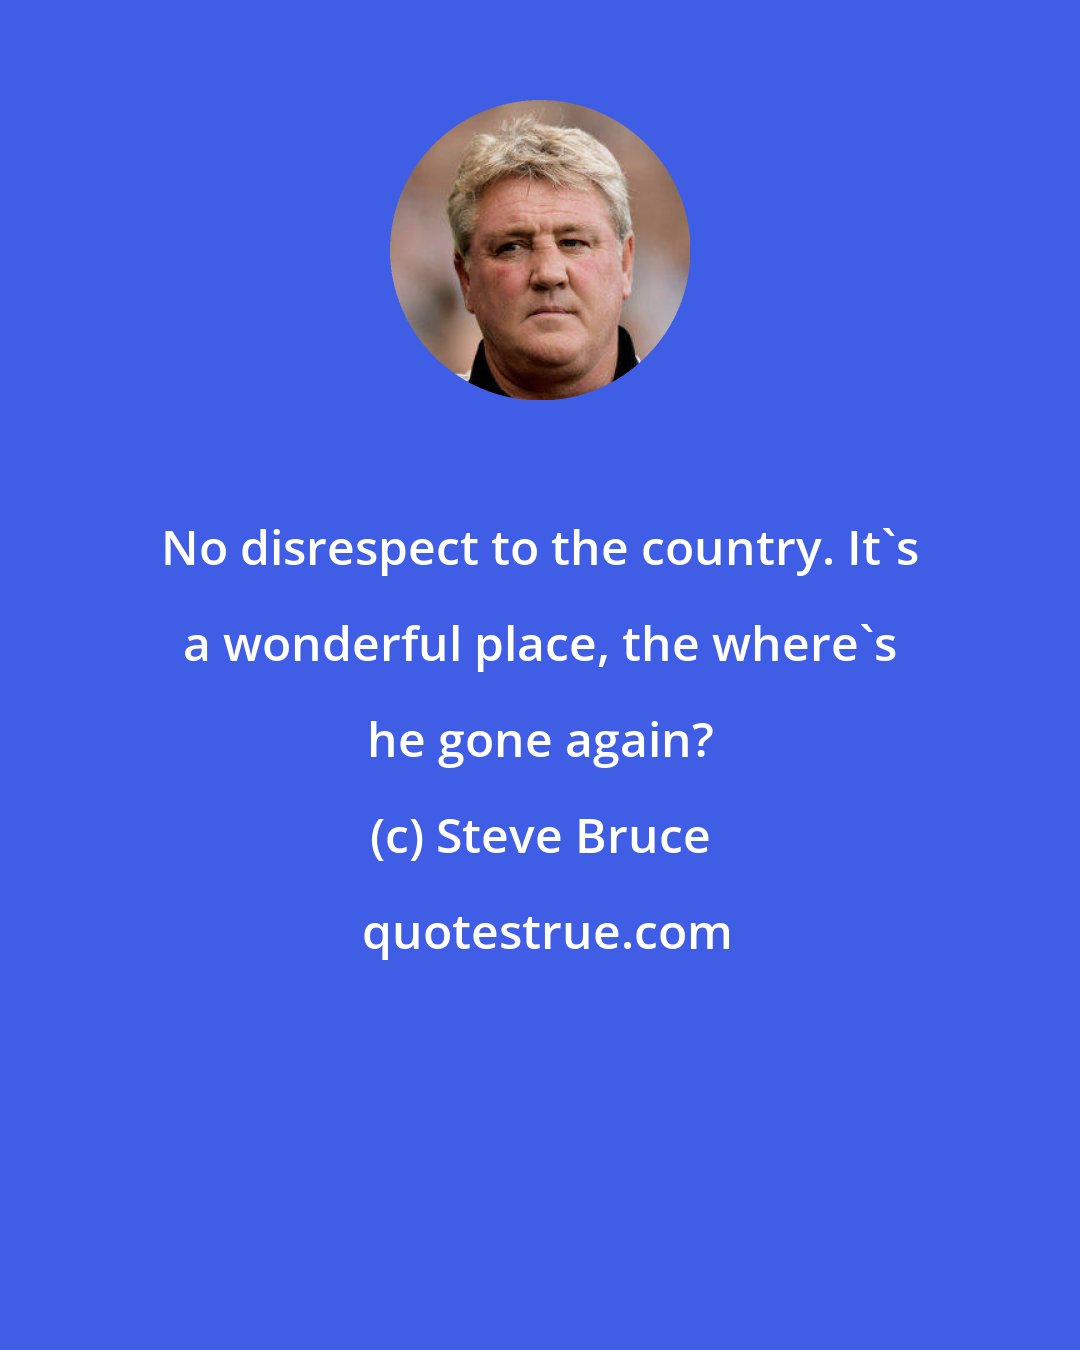 Steve Bruce: No disrespect to the country. It's a wonderful place, the where's he gone again?